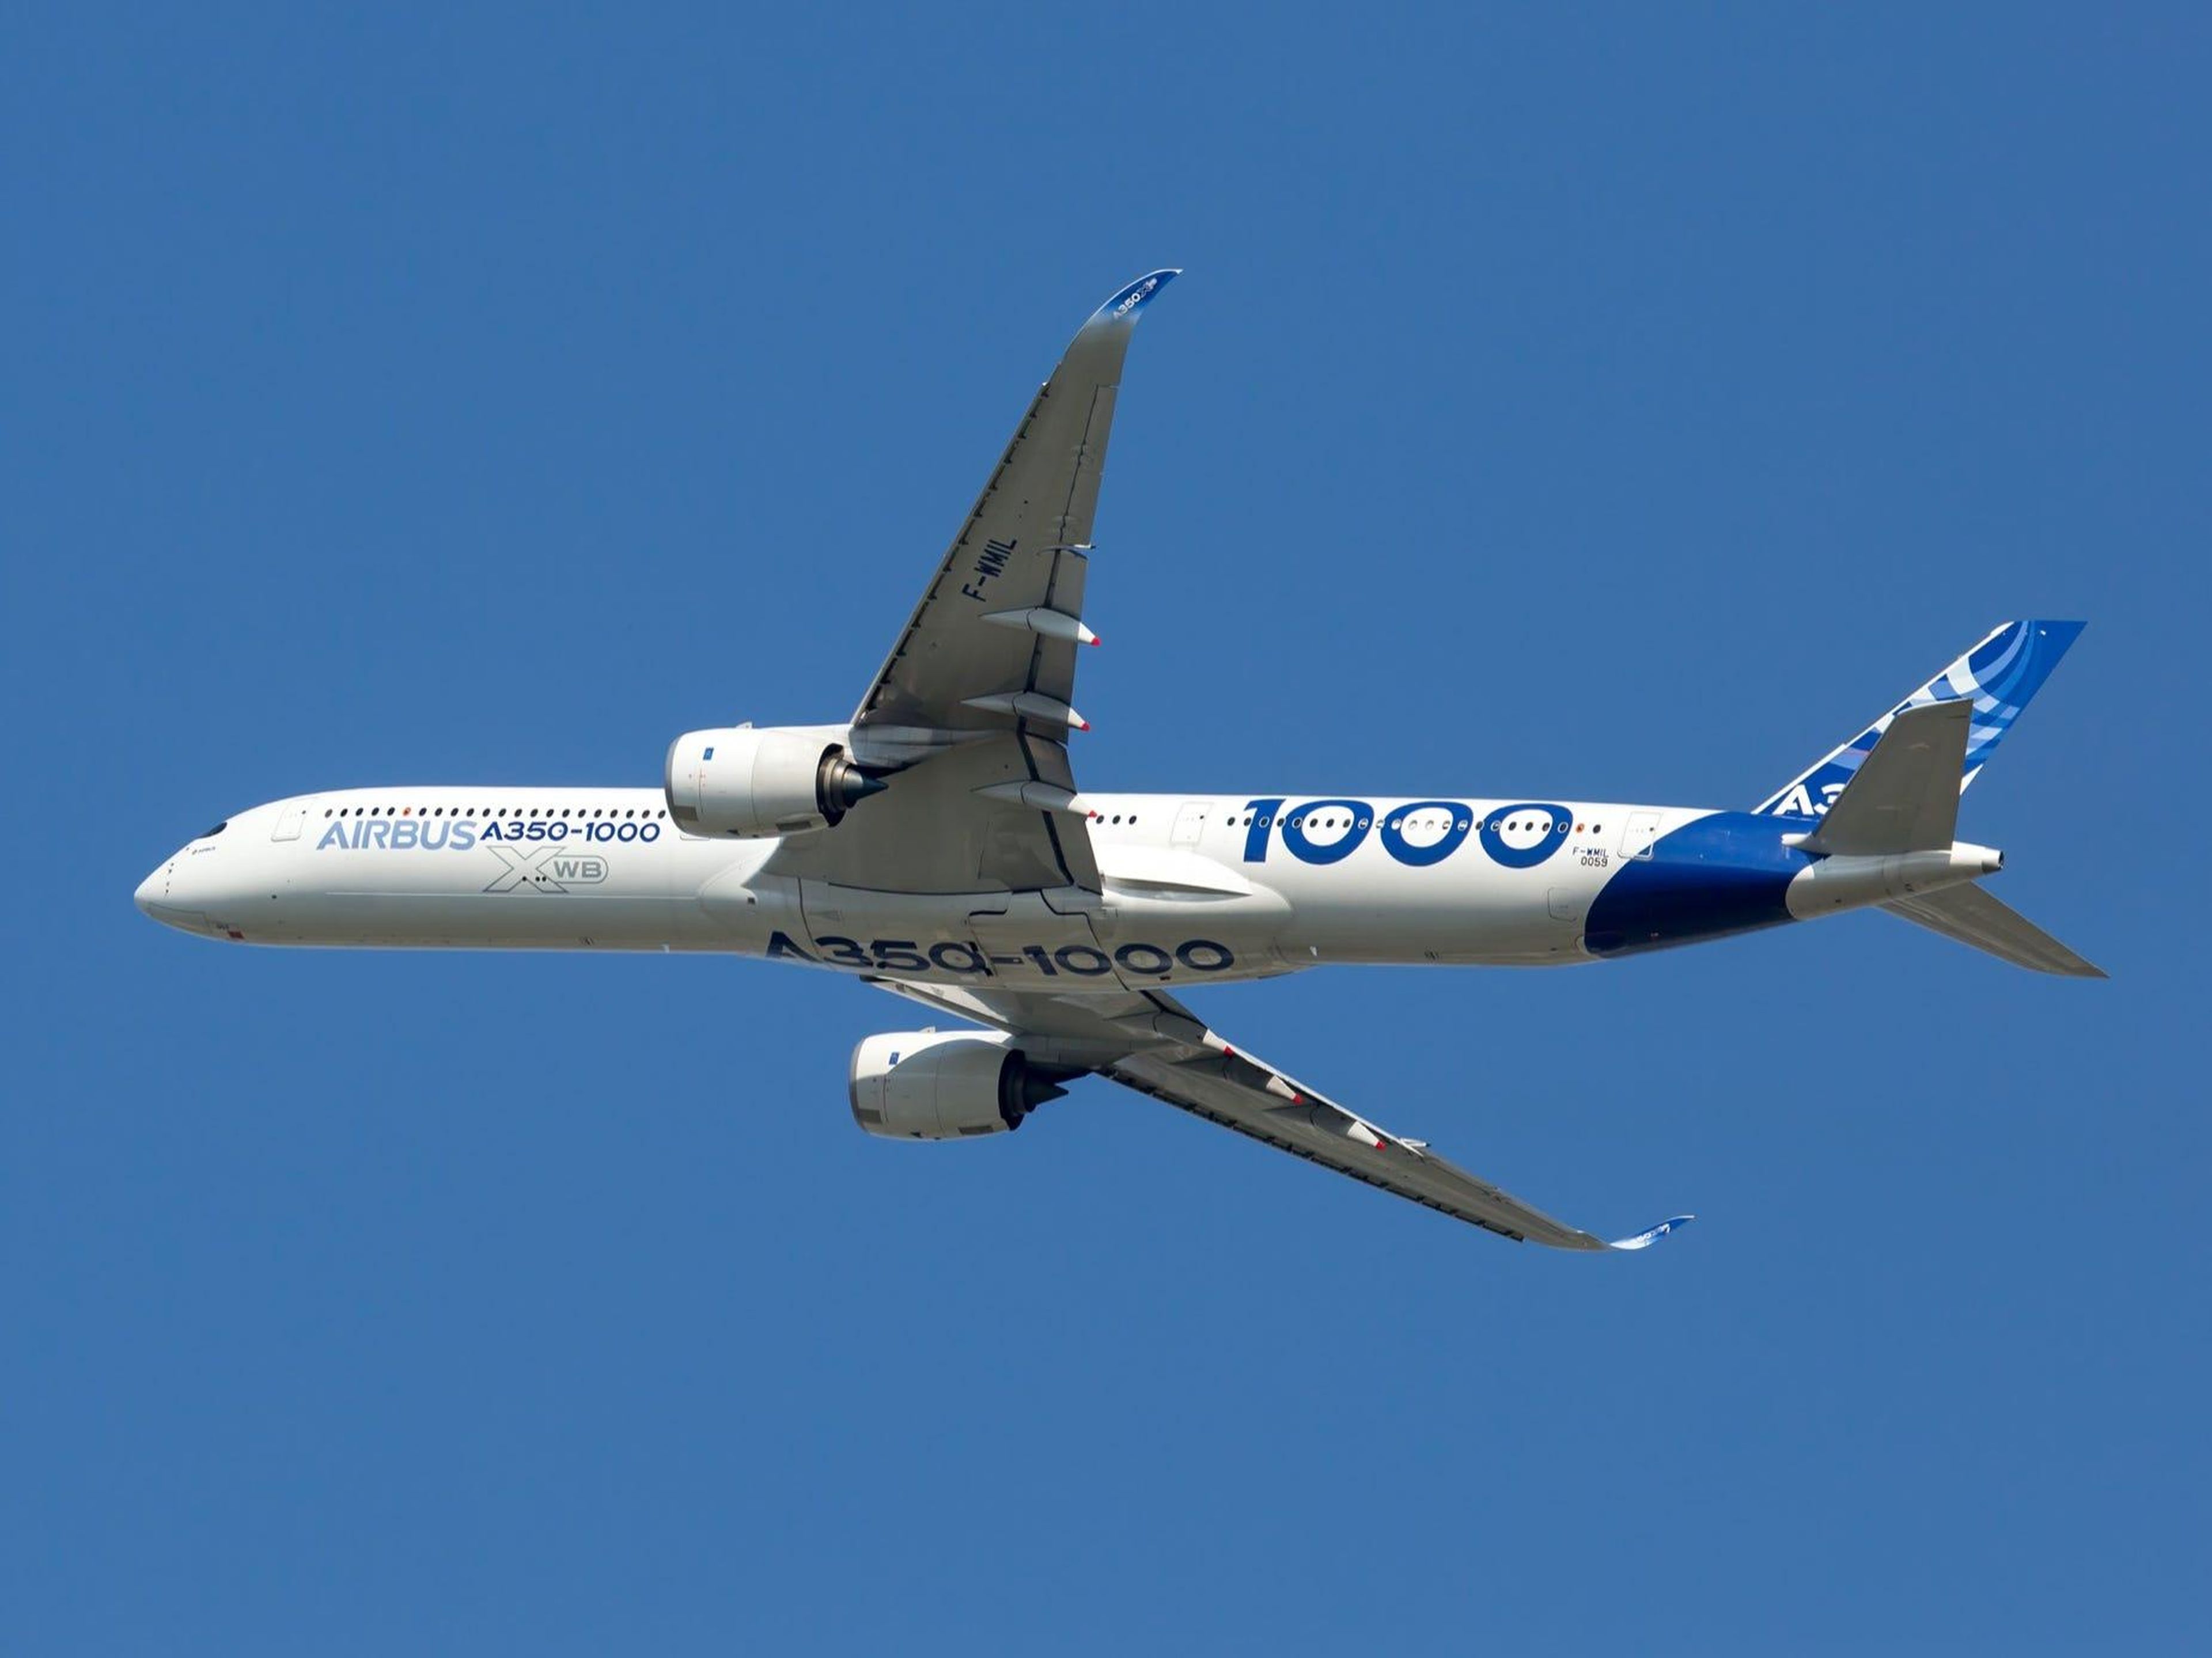 An Airbus A350-1000 XWB aircraft. Skycolors/Shutterstock.com